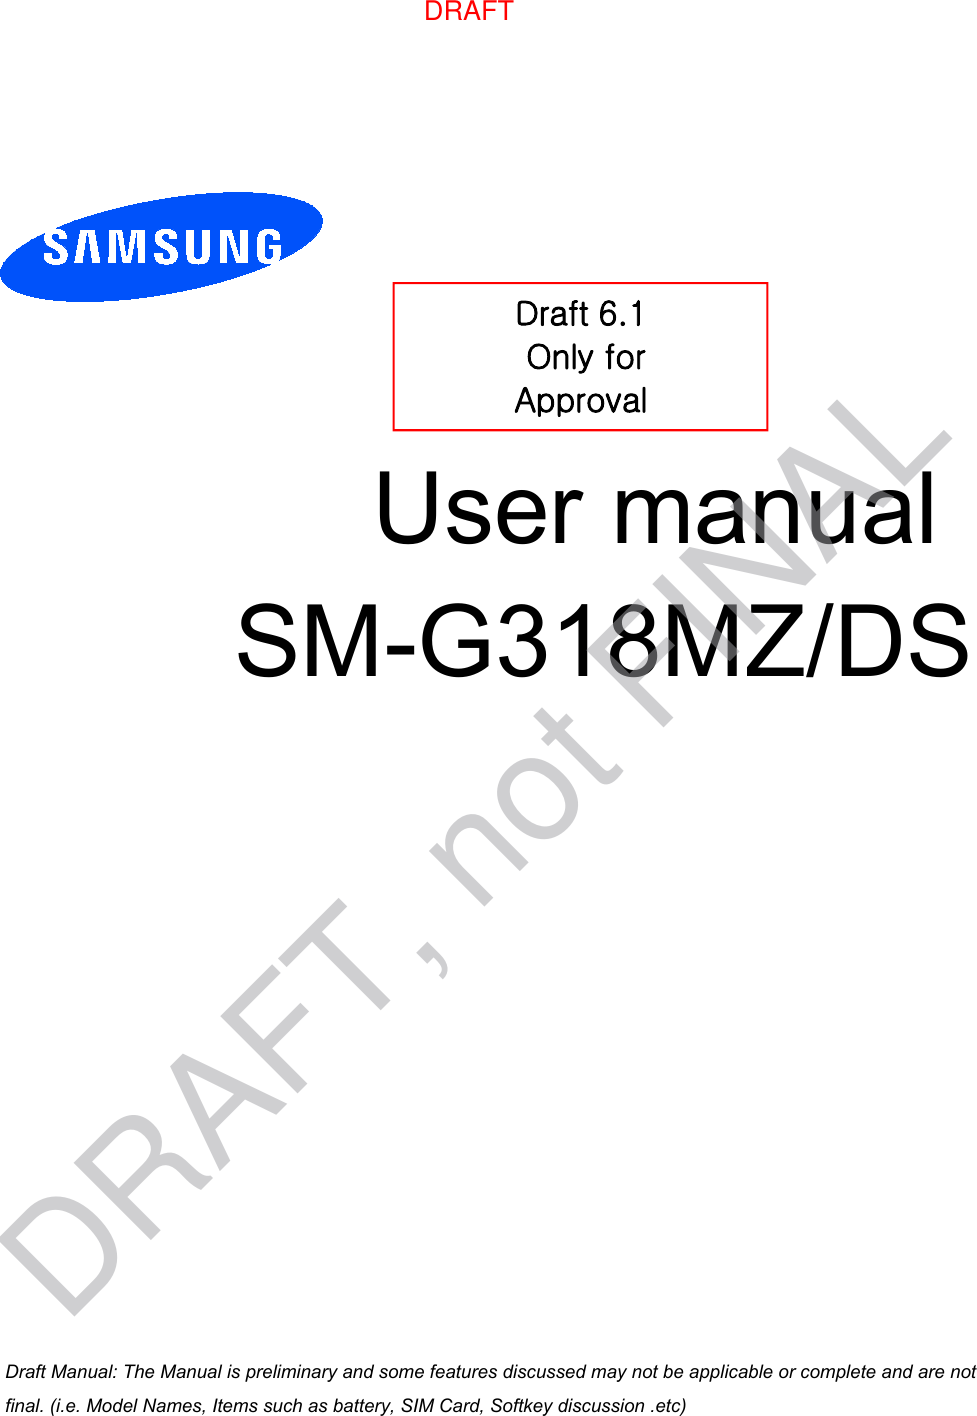 User manual  SM-G318MZ/DSDraft 6.1  Only for Approval Draft Manual: The Manual is preliminary and some features discussed may not be applicable or complete and are not final. (i.e. Model Names, Items such as battery, SIM Card, Softkey discussion .etc)DRAFTDRAFT, not FINAL